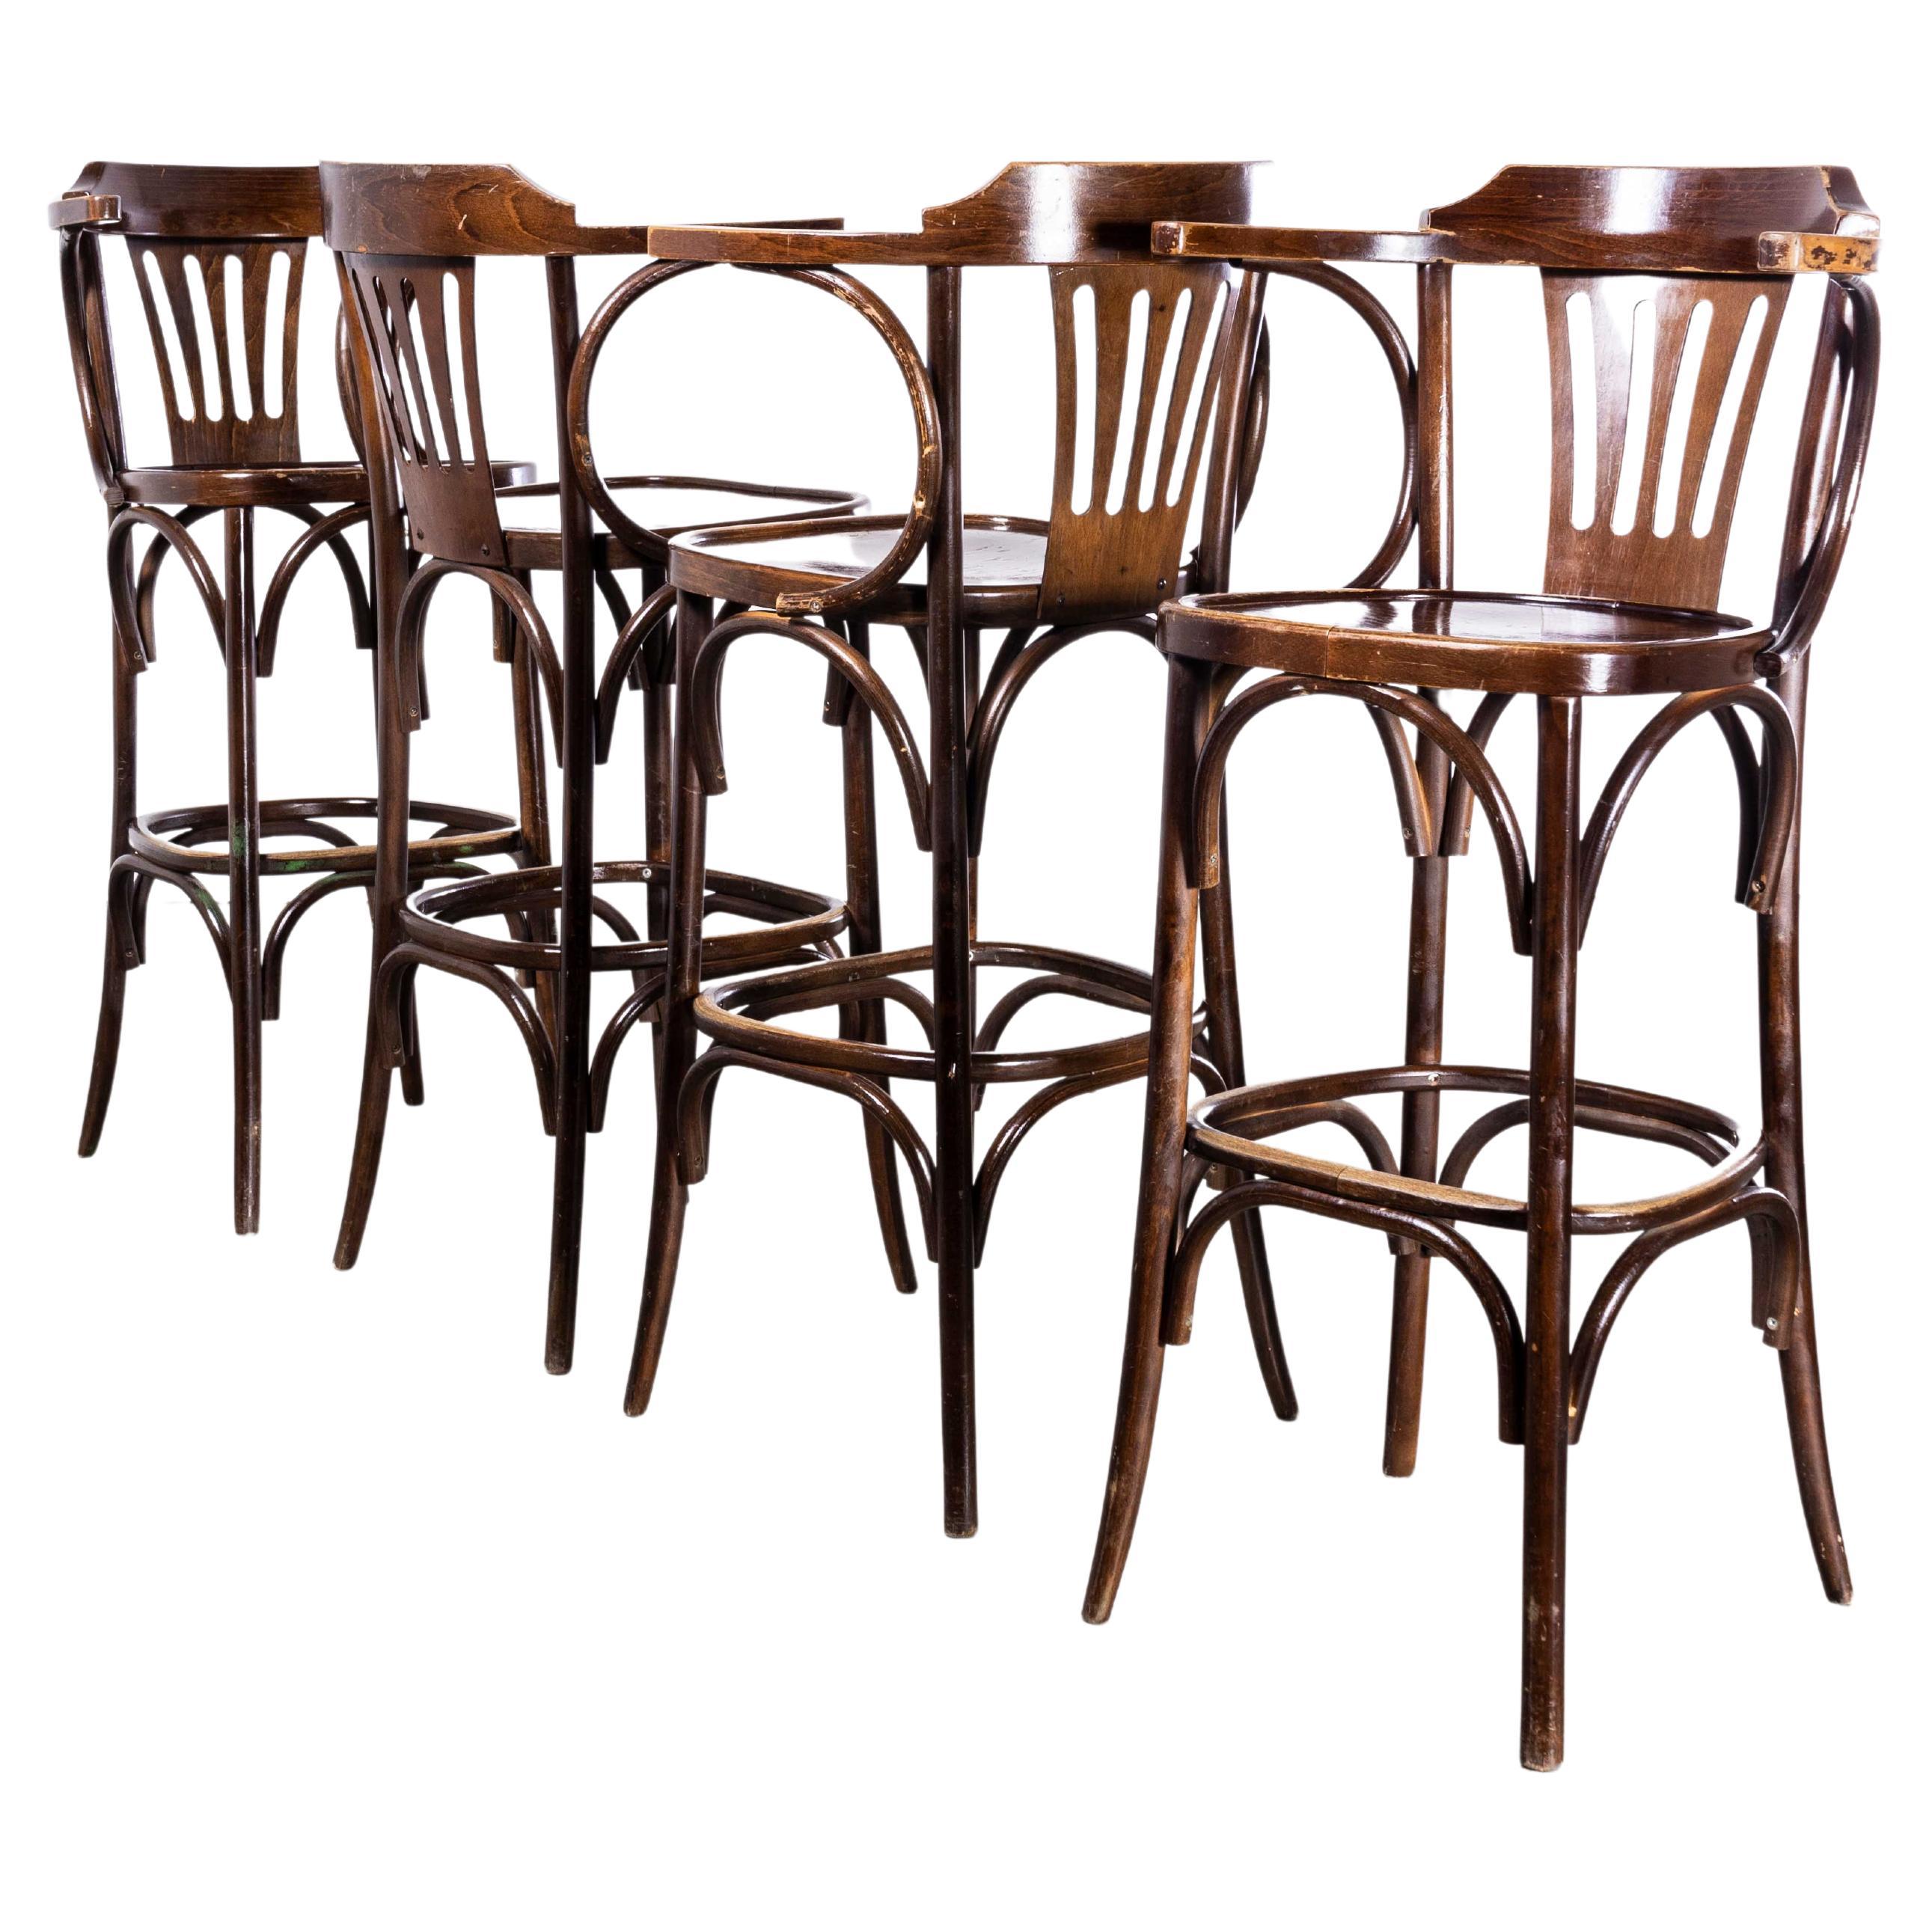 1970's Classic High Back Bentwood Bar Chairs With Arms - Set Of Four